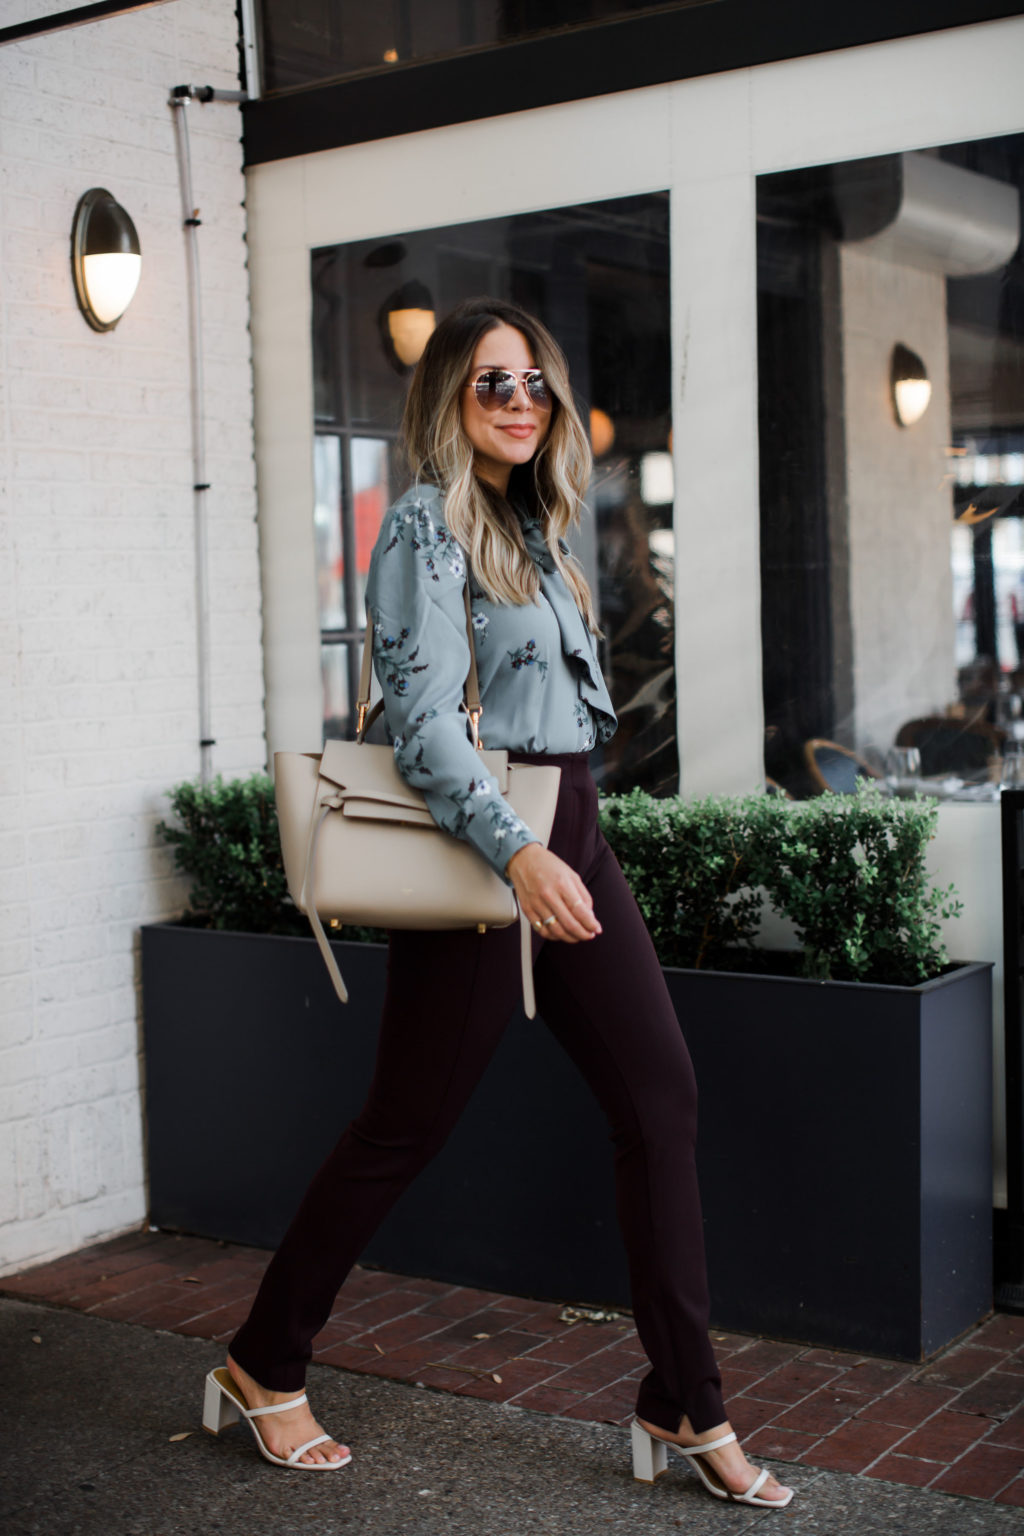 The Office Approved Pant You’ll Want to Wear Every Day